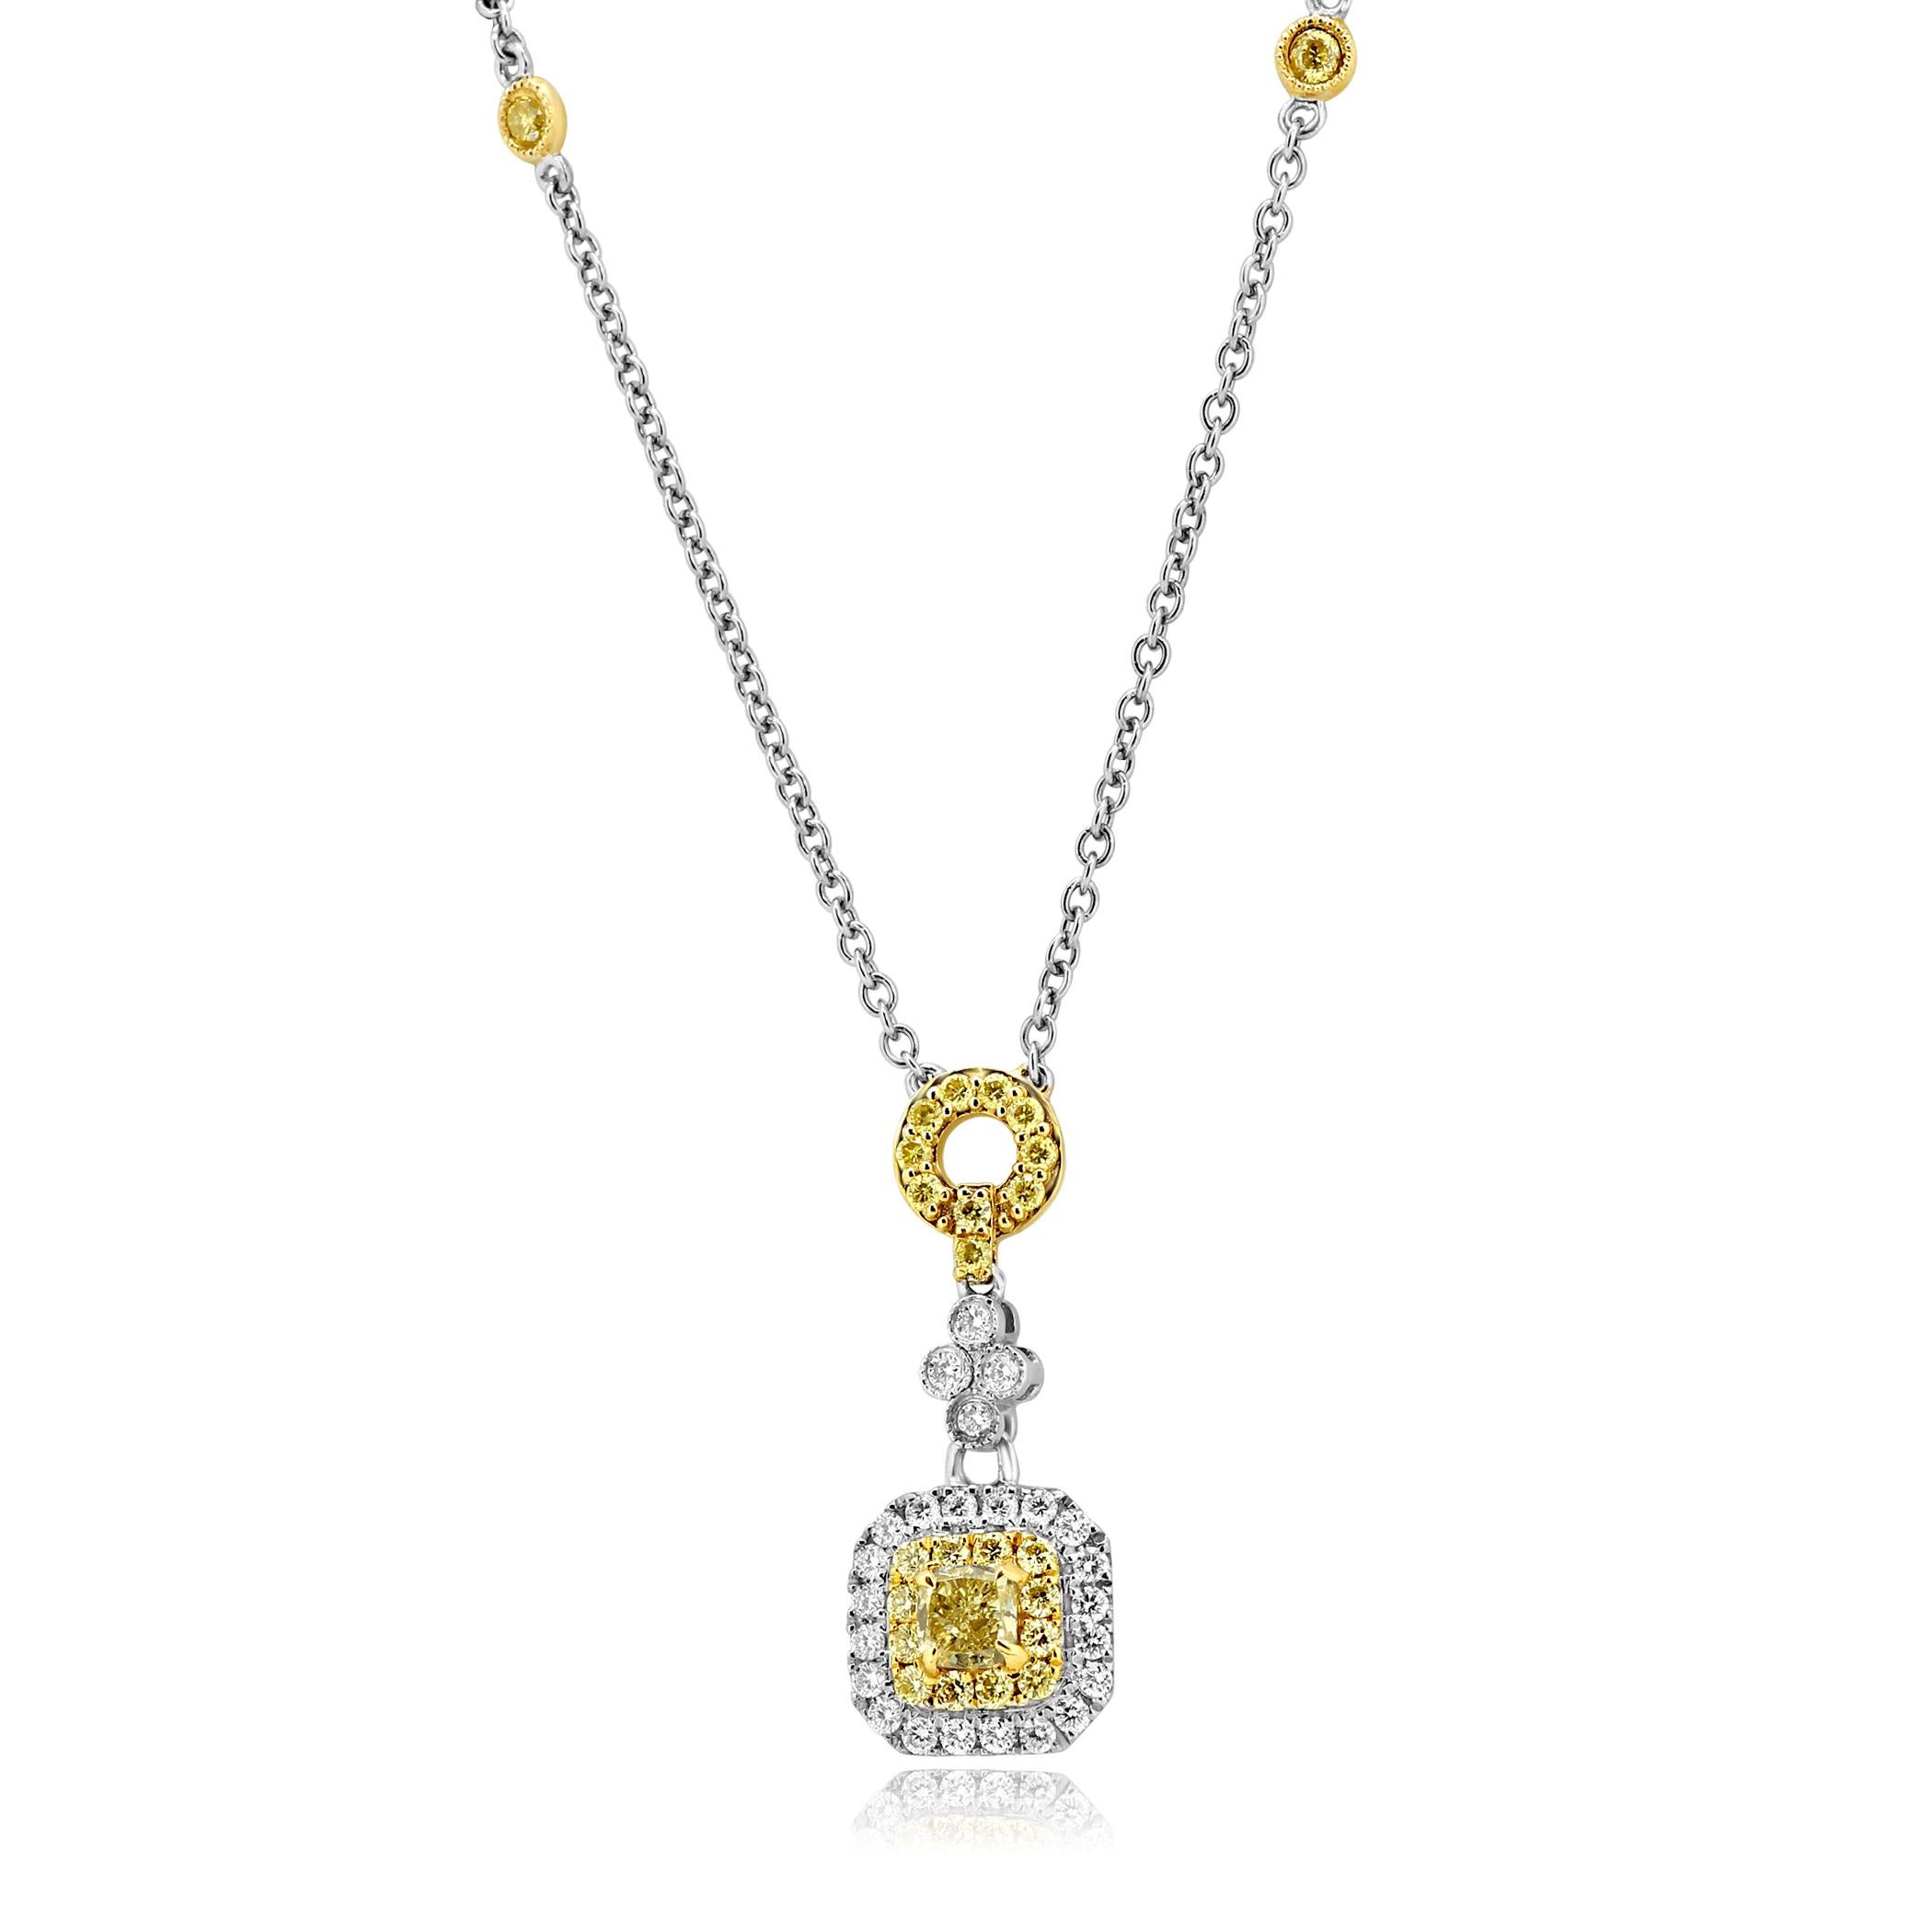 Natural Fancy Yellow Diamond Radiant Cut 0.34 carat Encircled in a Double Halo of Natural Fancy Yellow Diamond Round 0.53 Carat and White Round Diamond 0.25 Carat in Stunning 18K White and Yellow Gold Diamond By Yard Pendant  Necklace.

Style